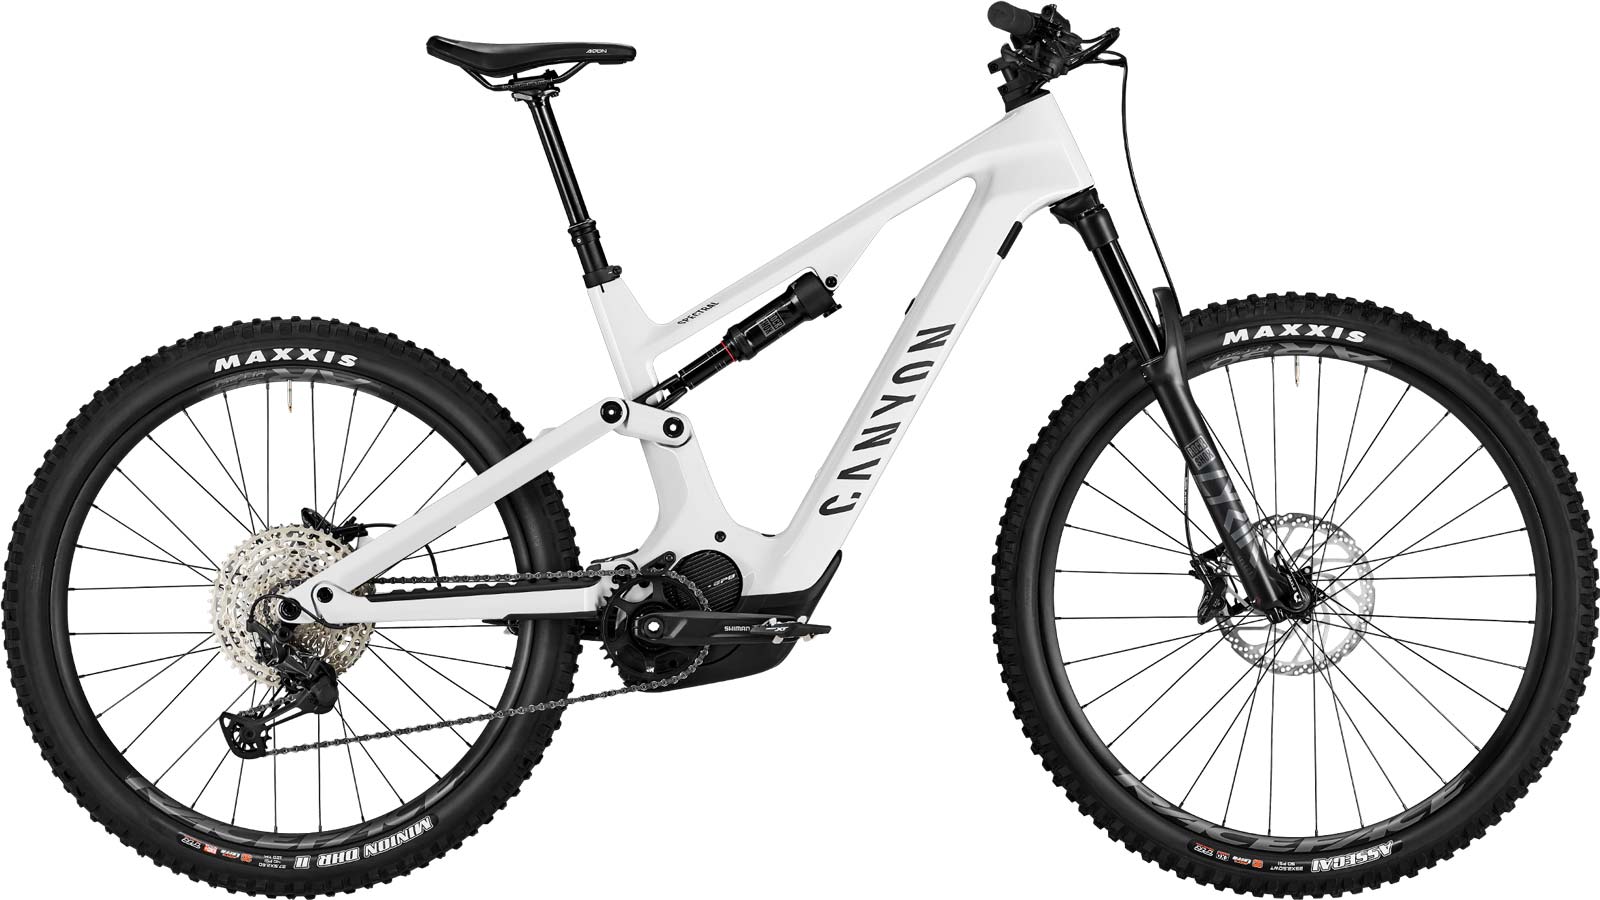 2022 canyon spectral:on cf7 white emtb 155mm travel 720wh battery shimano ep8 motor